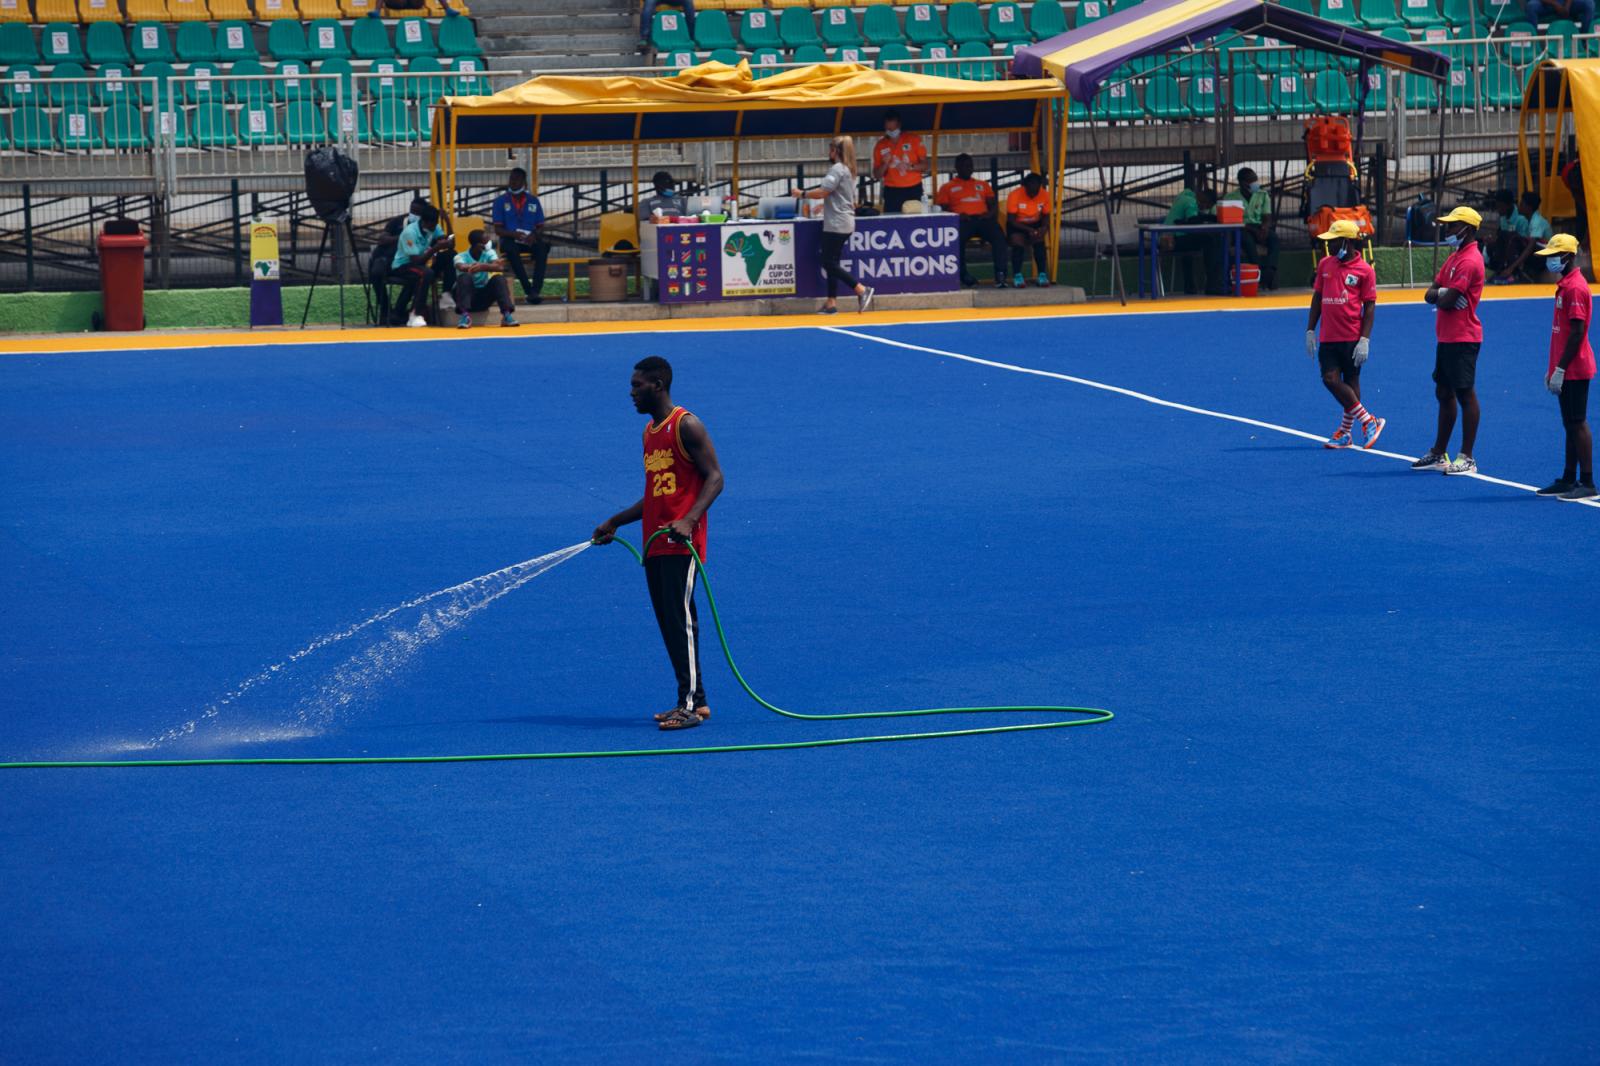 A worker sprinkles water on the...ey tournament, in Accra, Ghana.